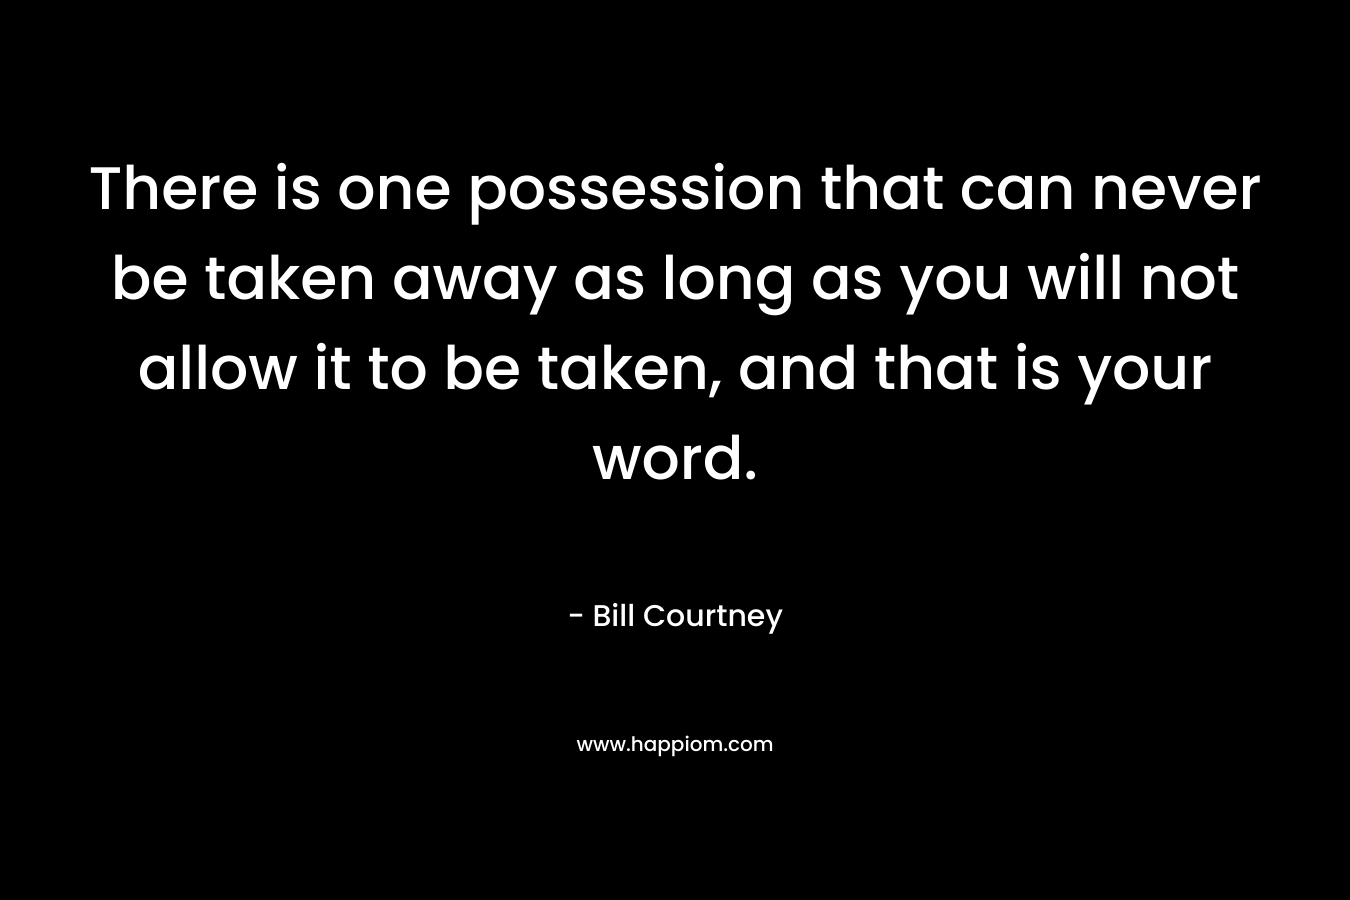 There is one possession that can never be taken away as long as you will not allow it to be taken, and that is your word. – Bill Courtney